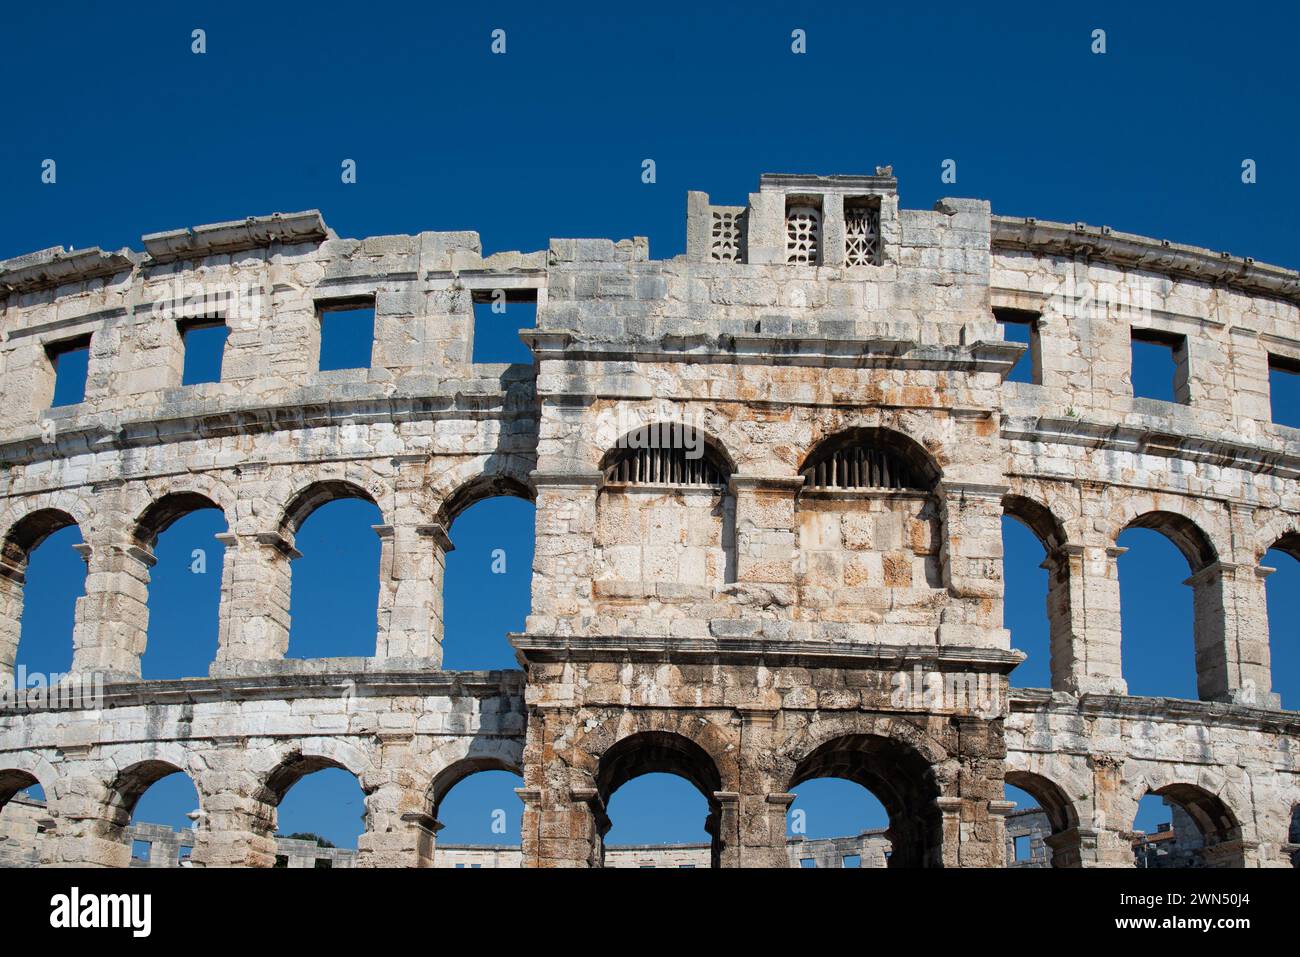 Roman amphitheater in Pula.  Built in the 1st century AD  Arches, architectural details.  Pula, Pola, Istria, Croatia Stock Photo